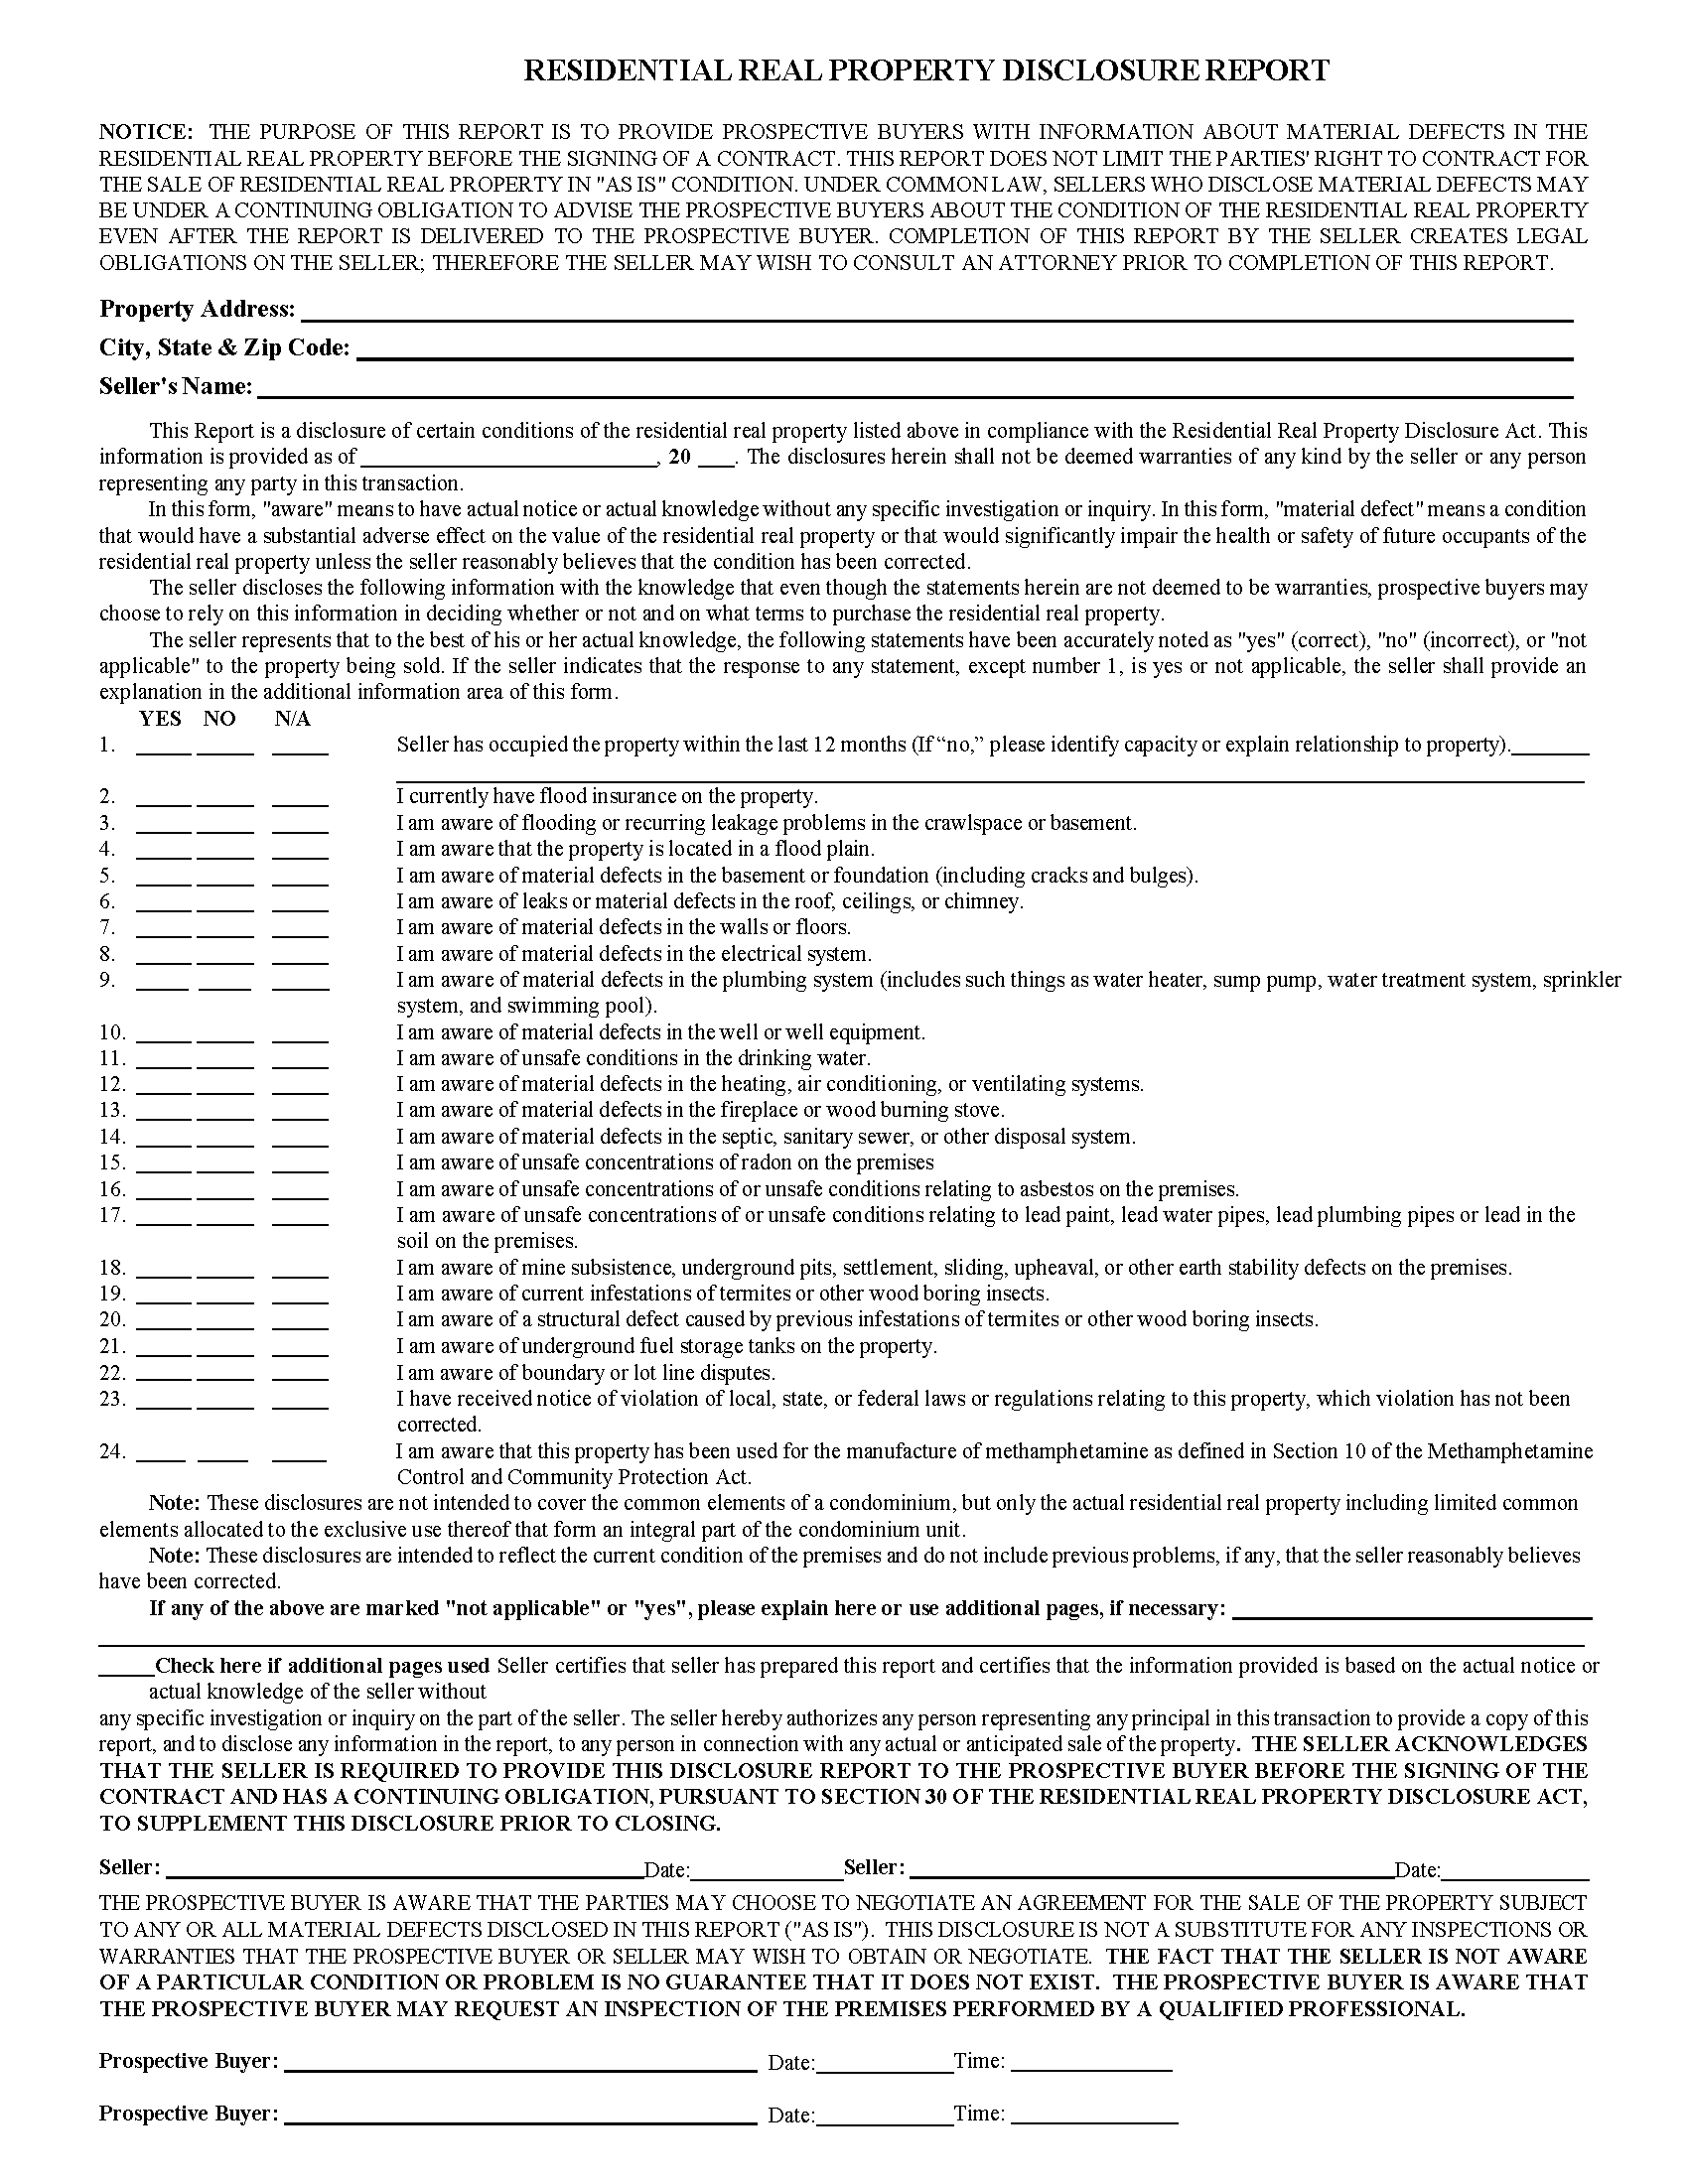 Clark County Real Property Disclosure Form